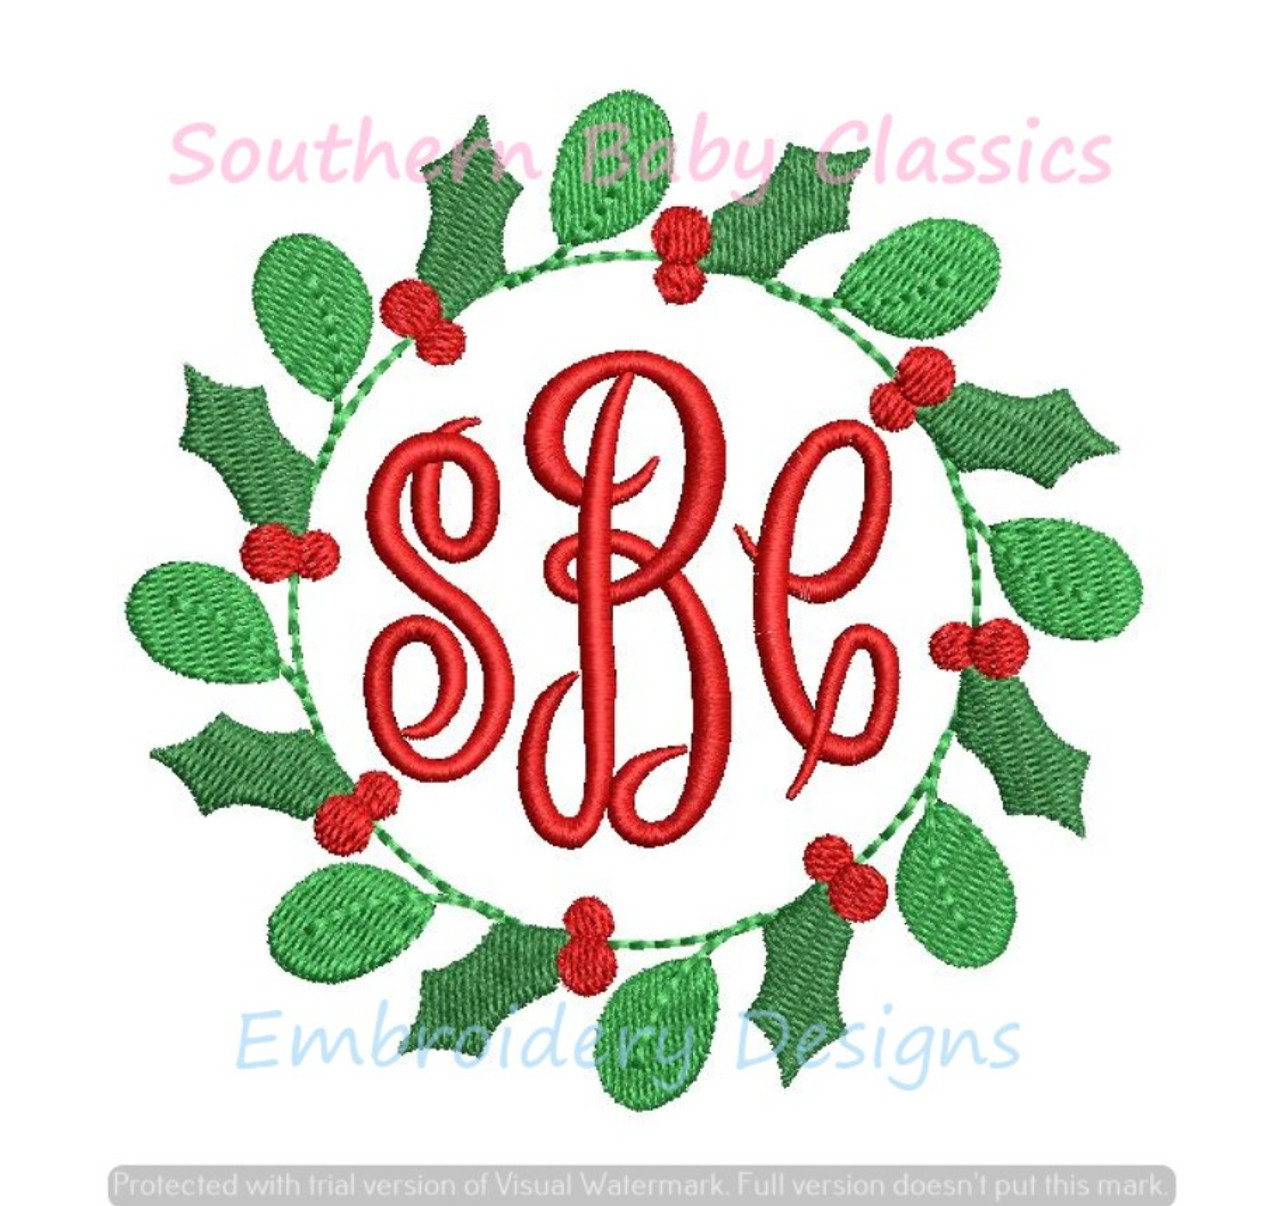 Berry Name Patch Embroidery Machine Design